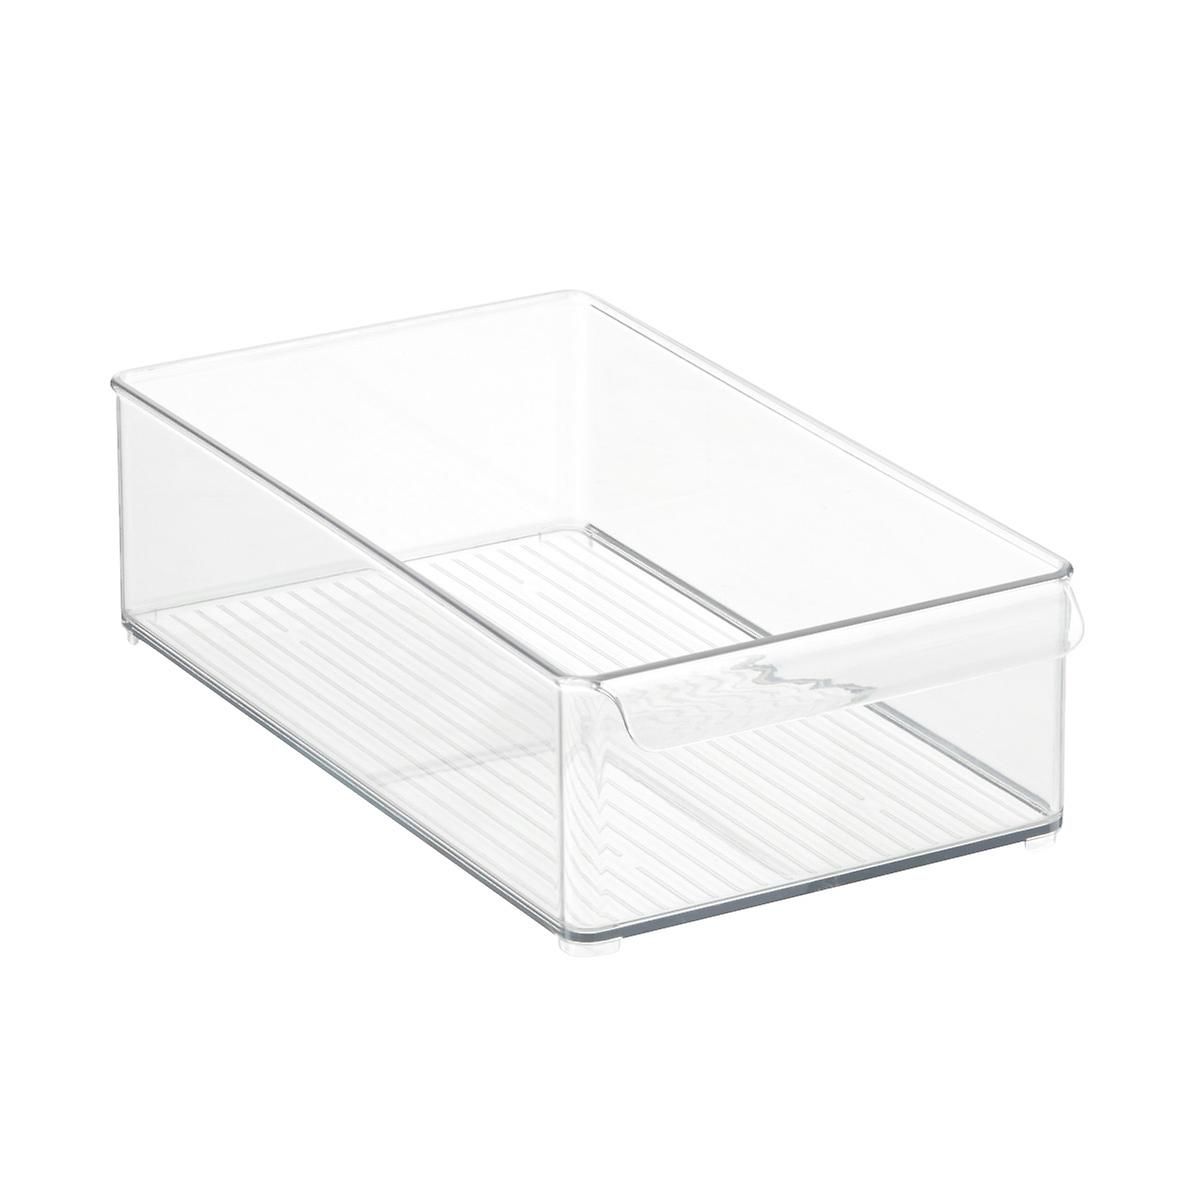 IDESIGN Wide Deep Fridge Bins Tray Clear | The Container Store